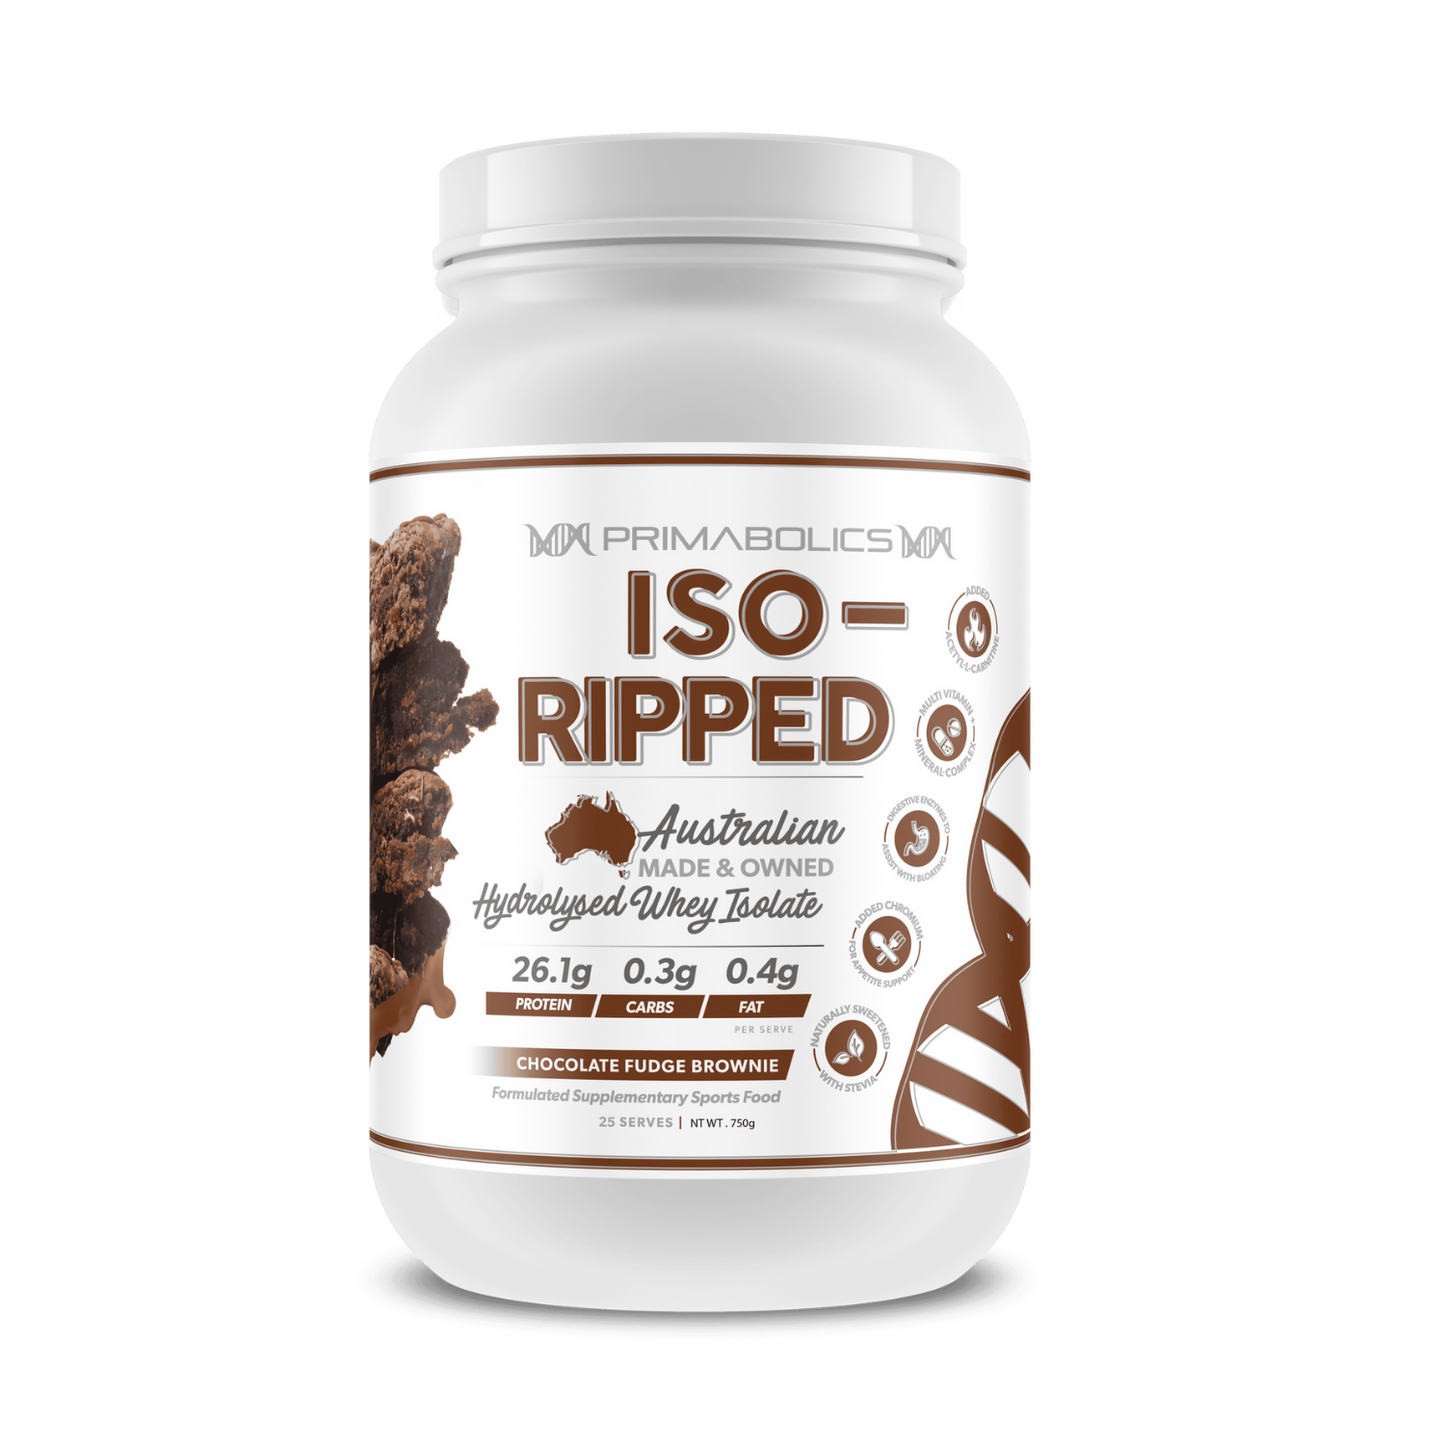 Iso-ripped